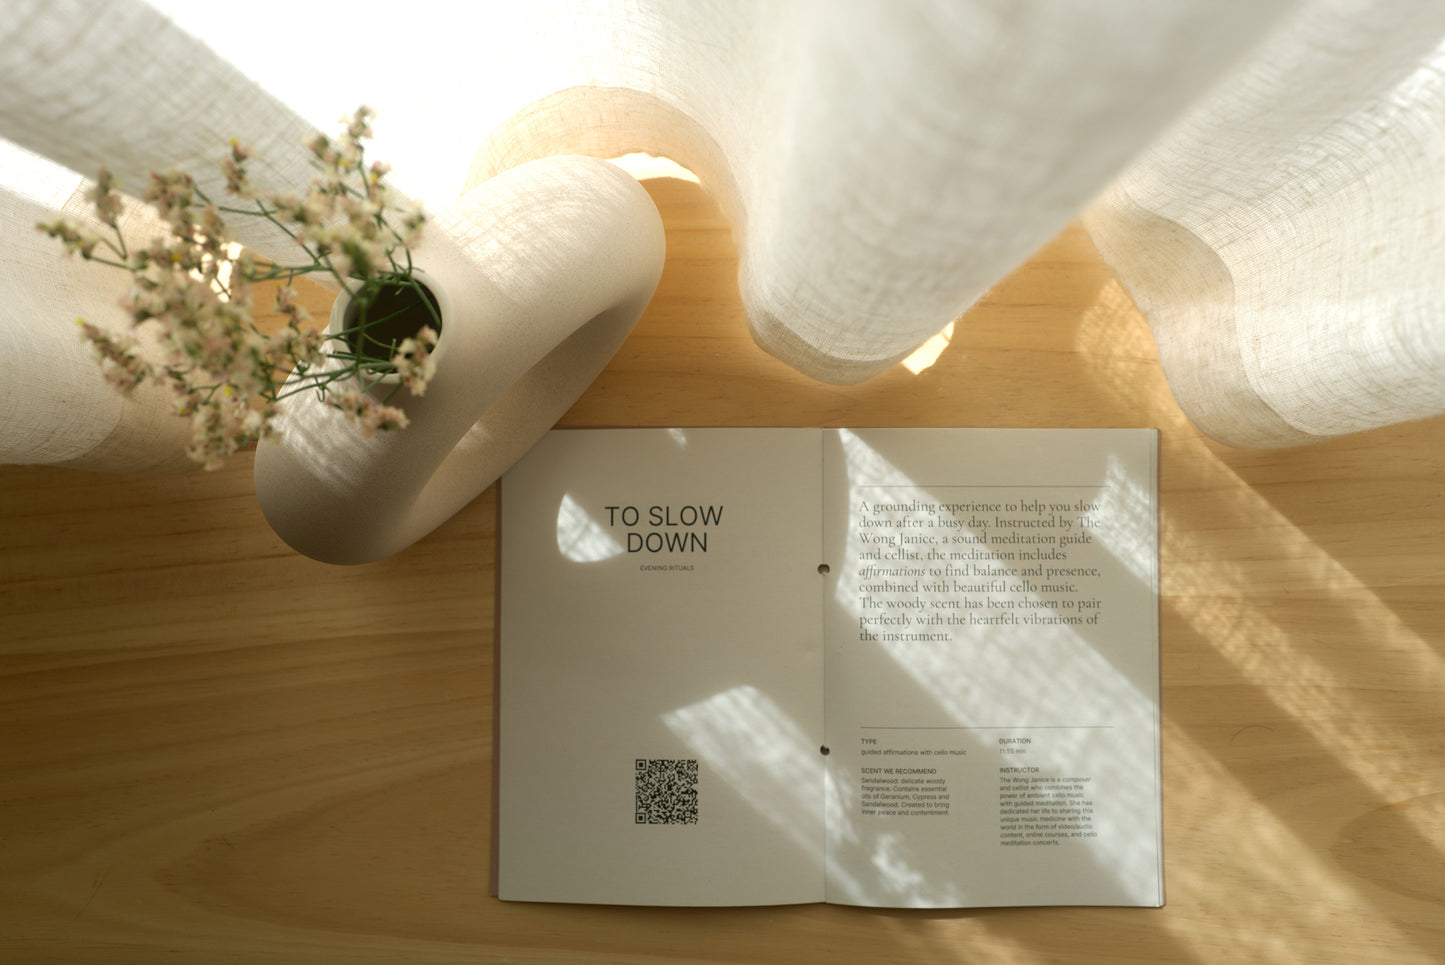 booklet opened next to a vase with flowers